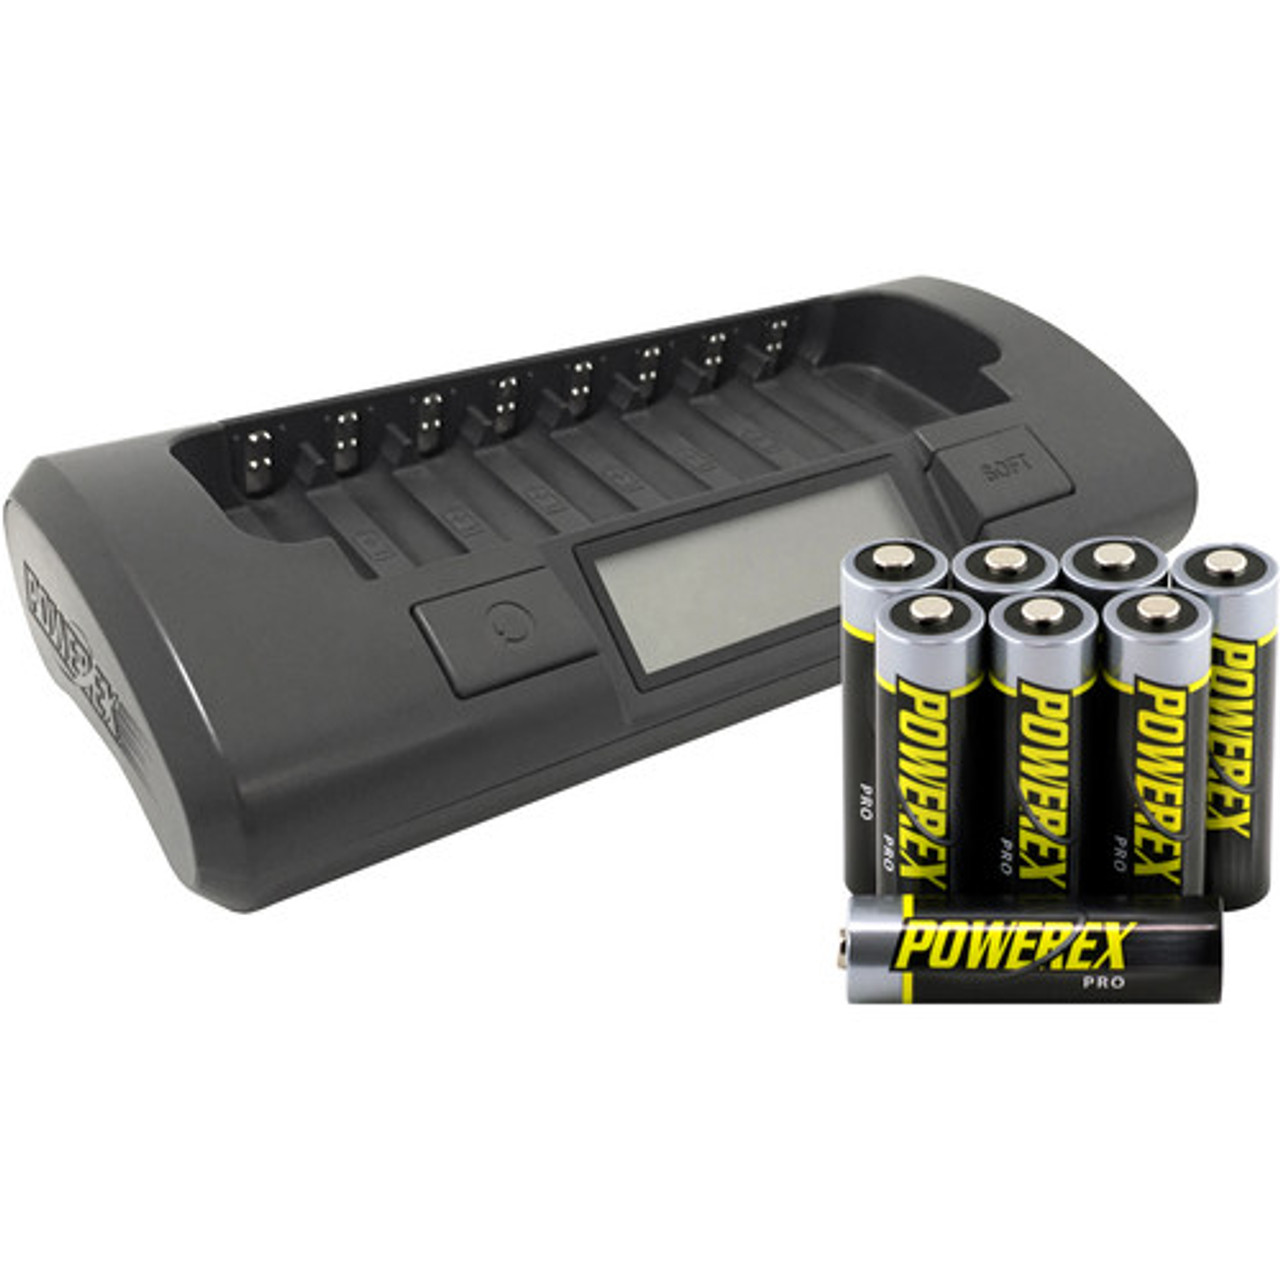 Powerex Mh C800s Charger With 8 Pro Aa Nimh Batteries Maha Energy